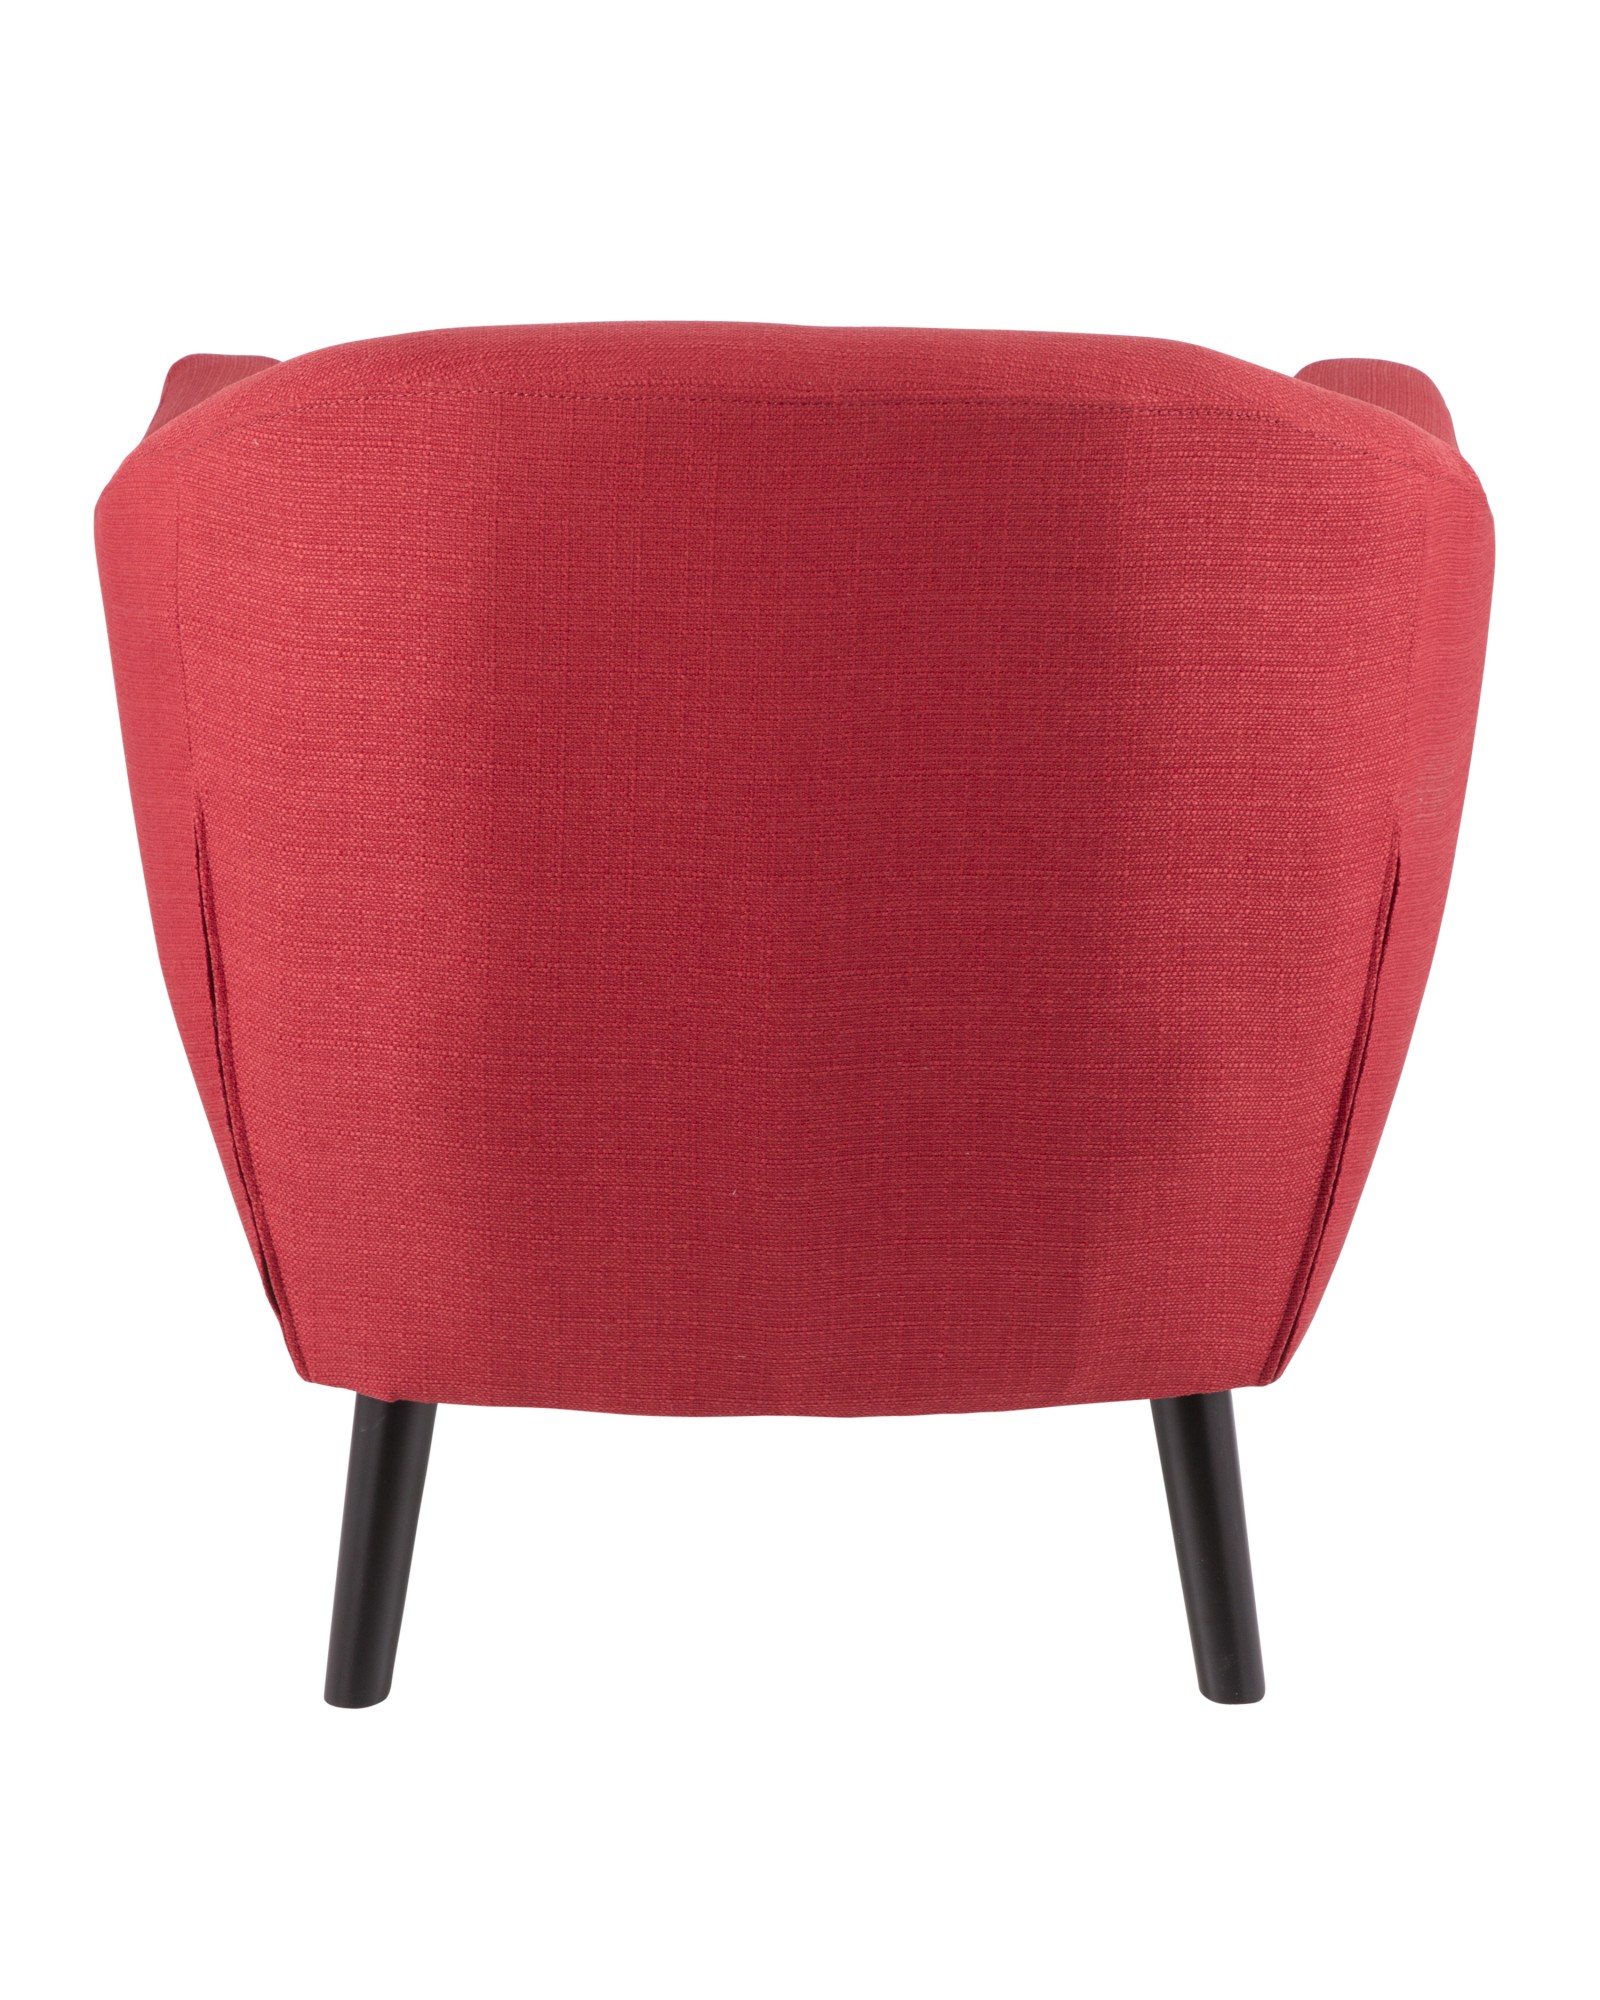 Rockwell Mid Century Modern Accent Chair in Red